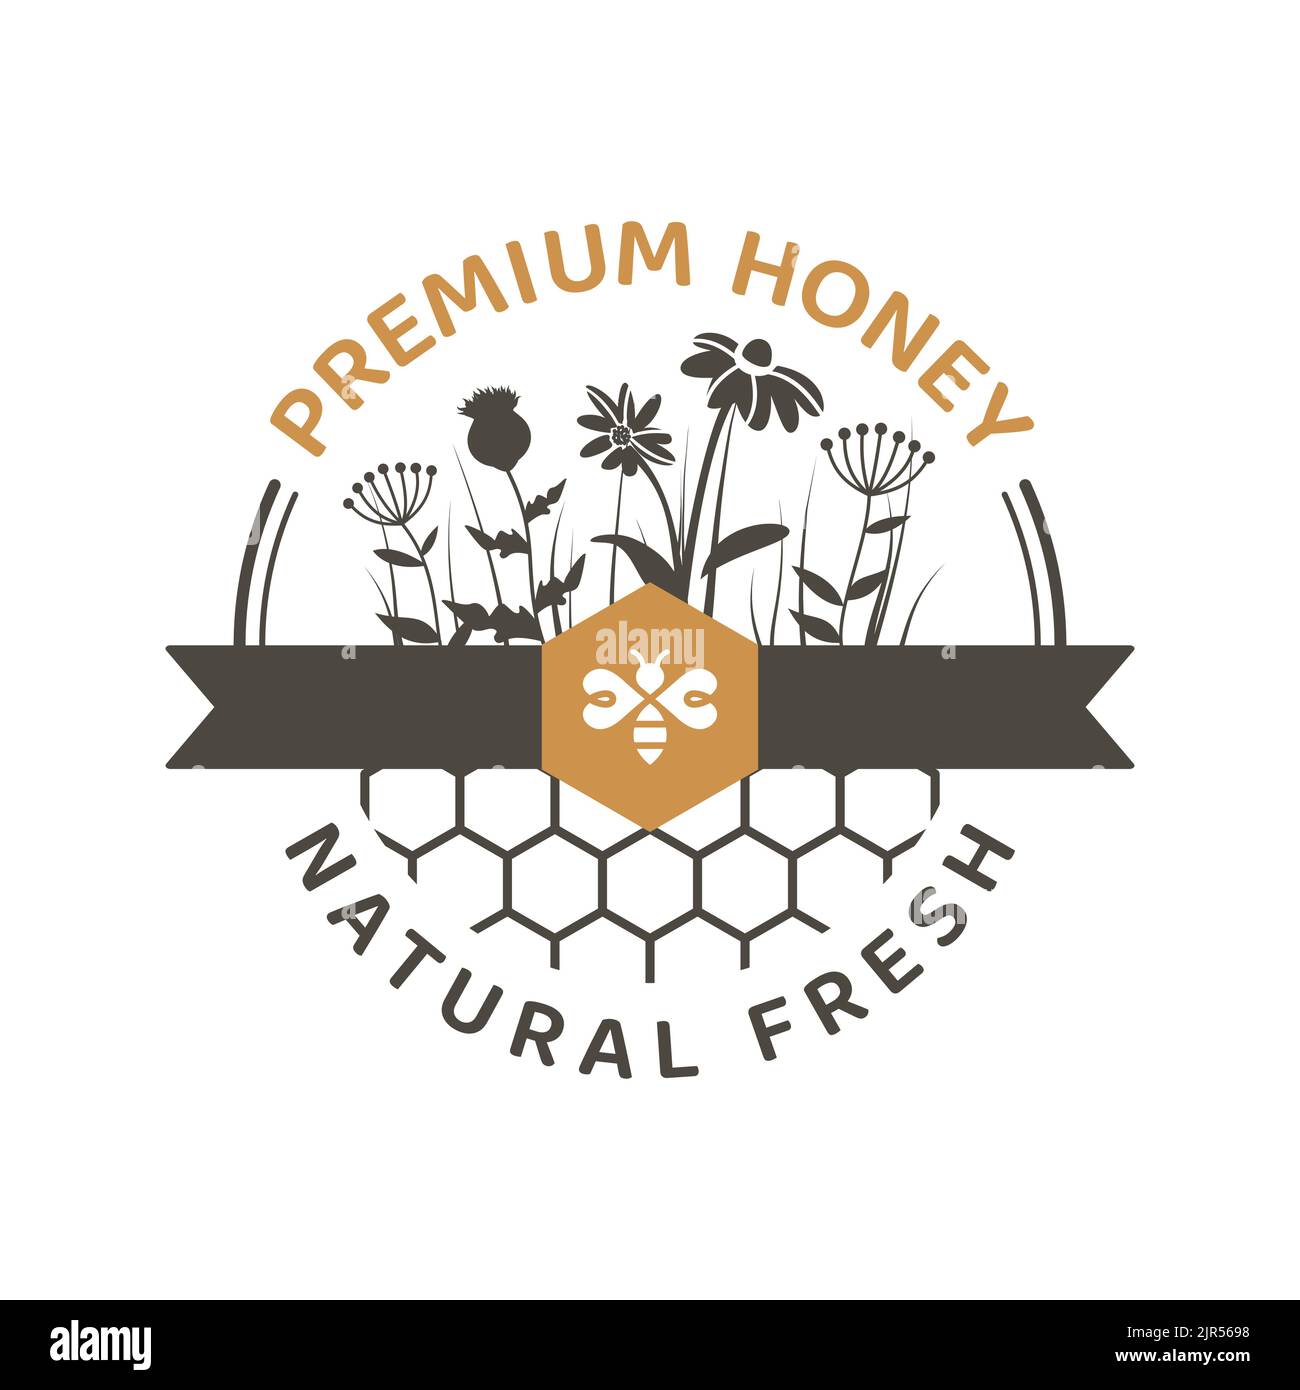 Honeycomb Round-Two Layer-Wood Cutout-Bee Theme Wood Decor-3D Honeycom –  Your Creatives Inc